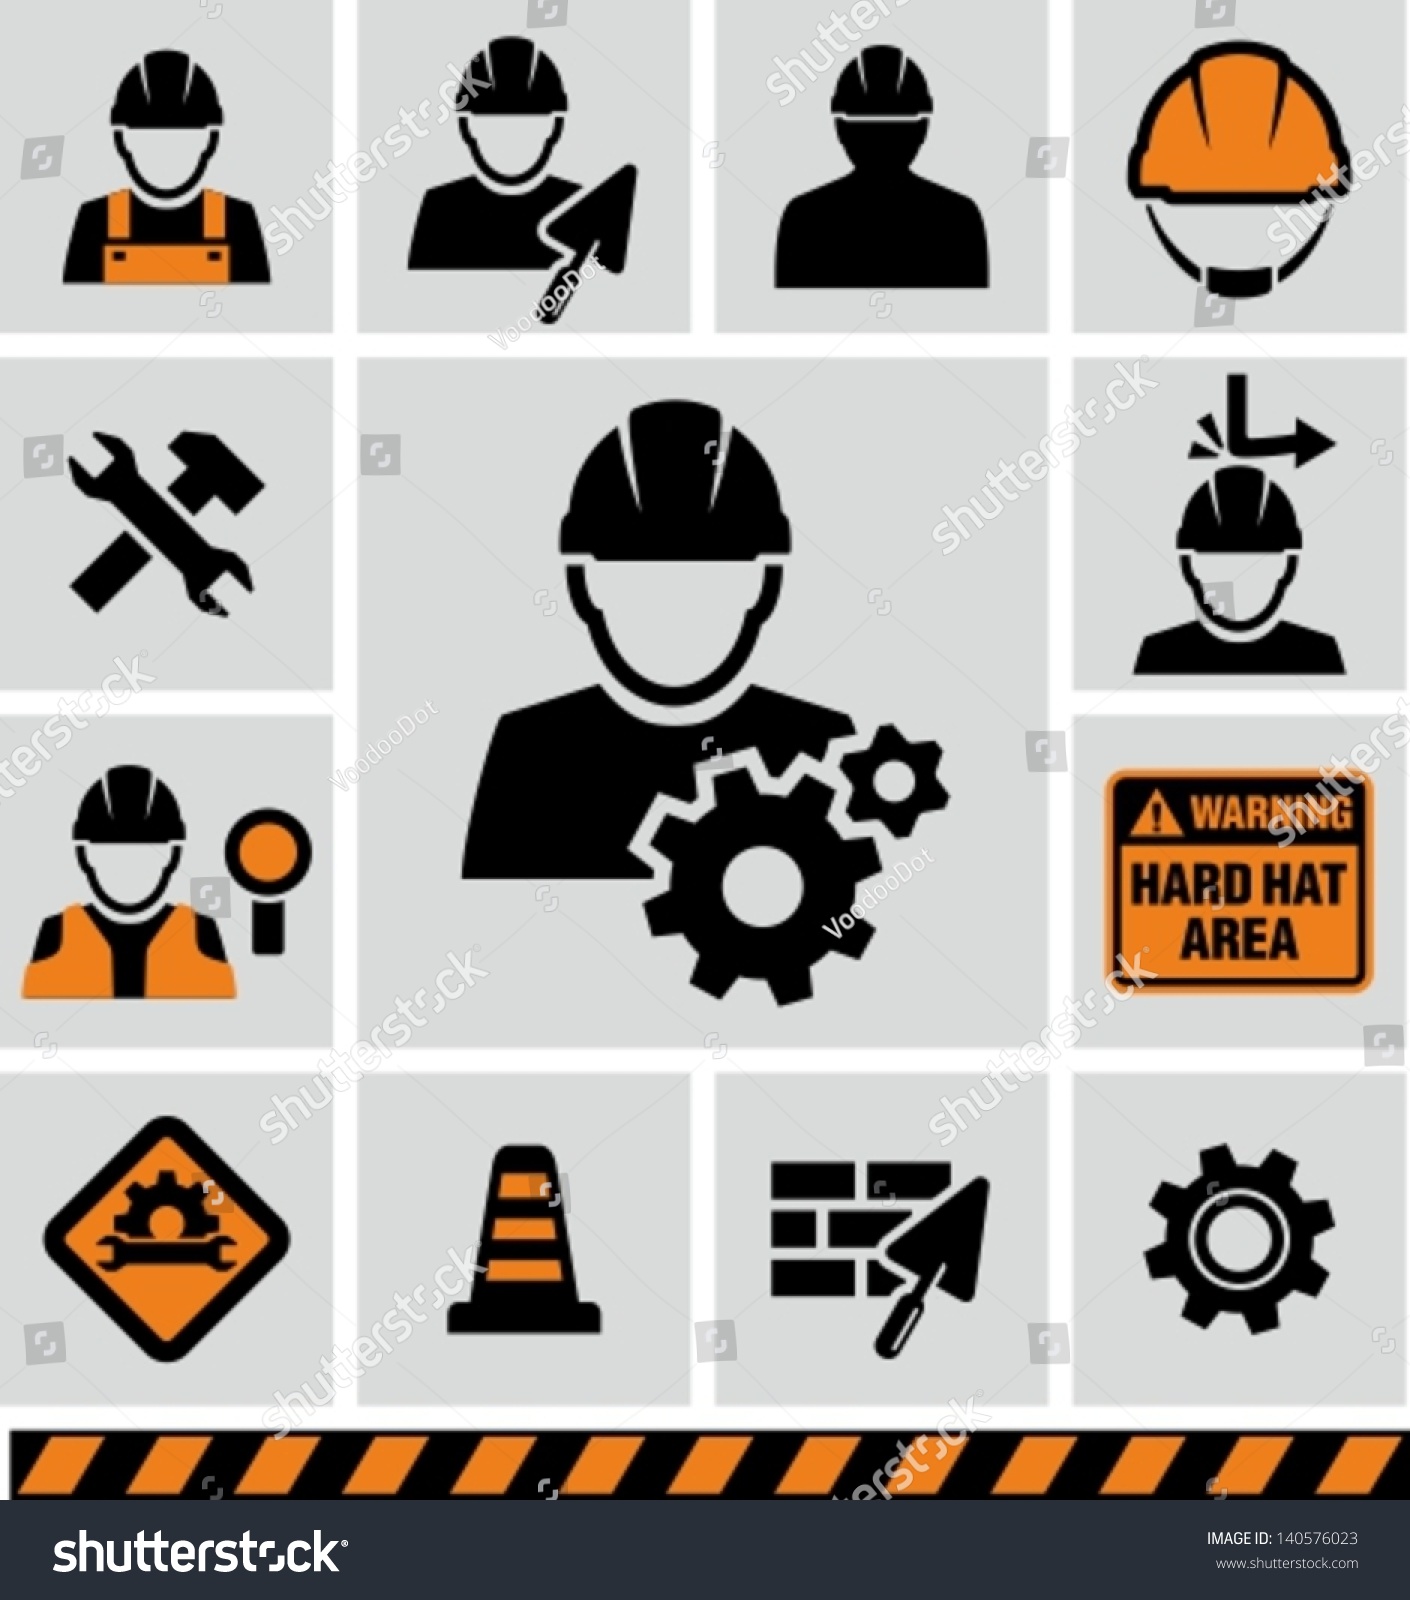 industrial accident clipart - photo #7